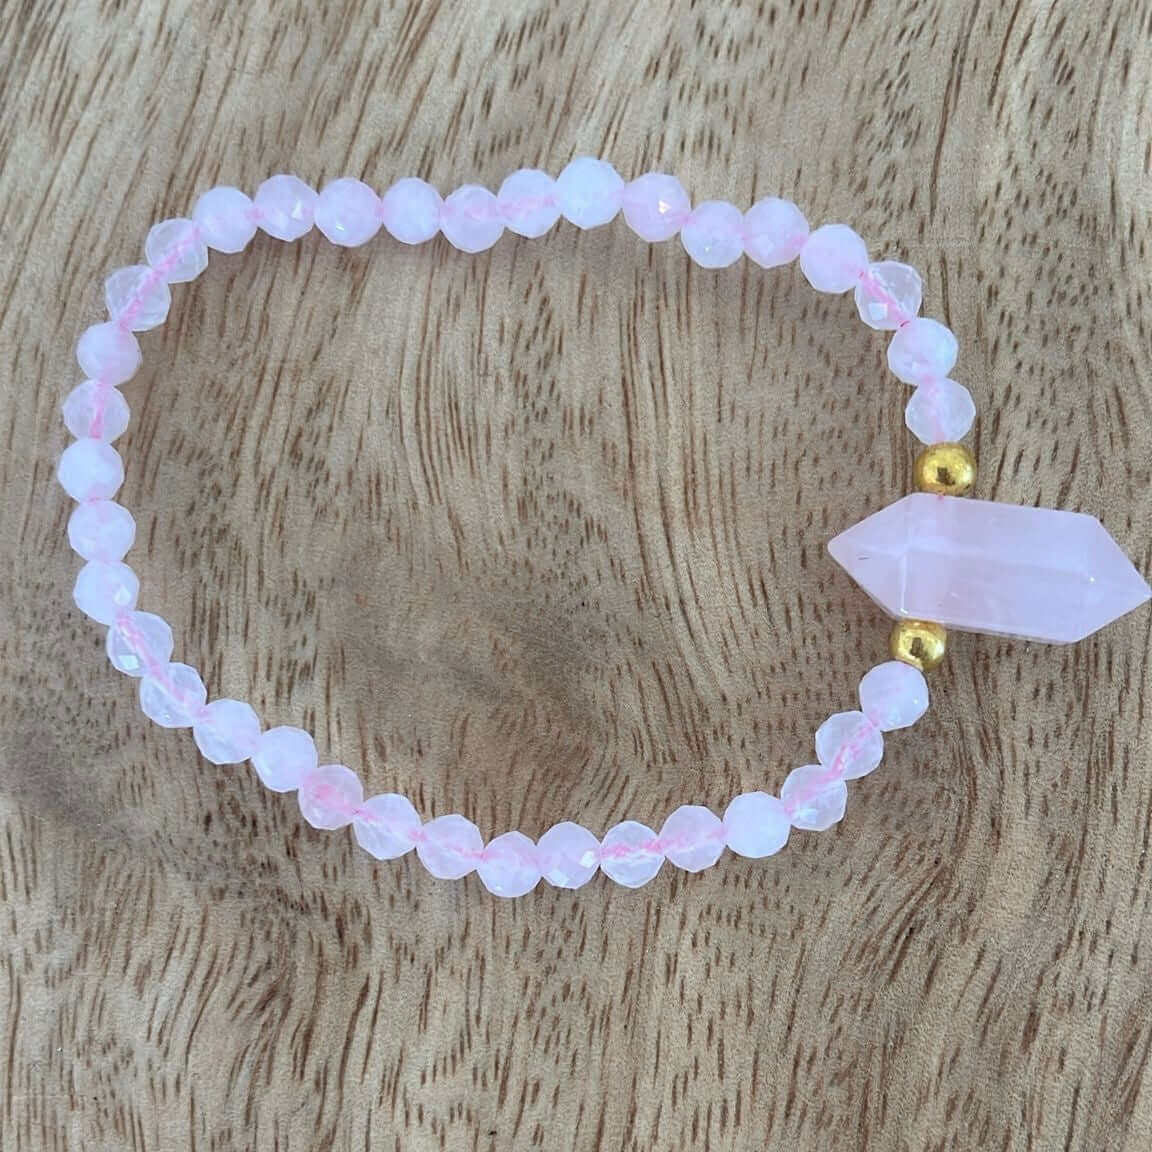 Rose quartz bracelet - elegance and harmony in natural stone for love and self-love